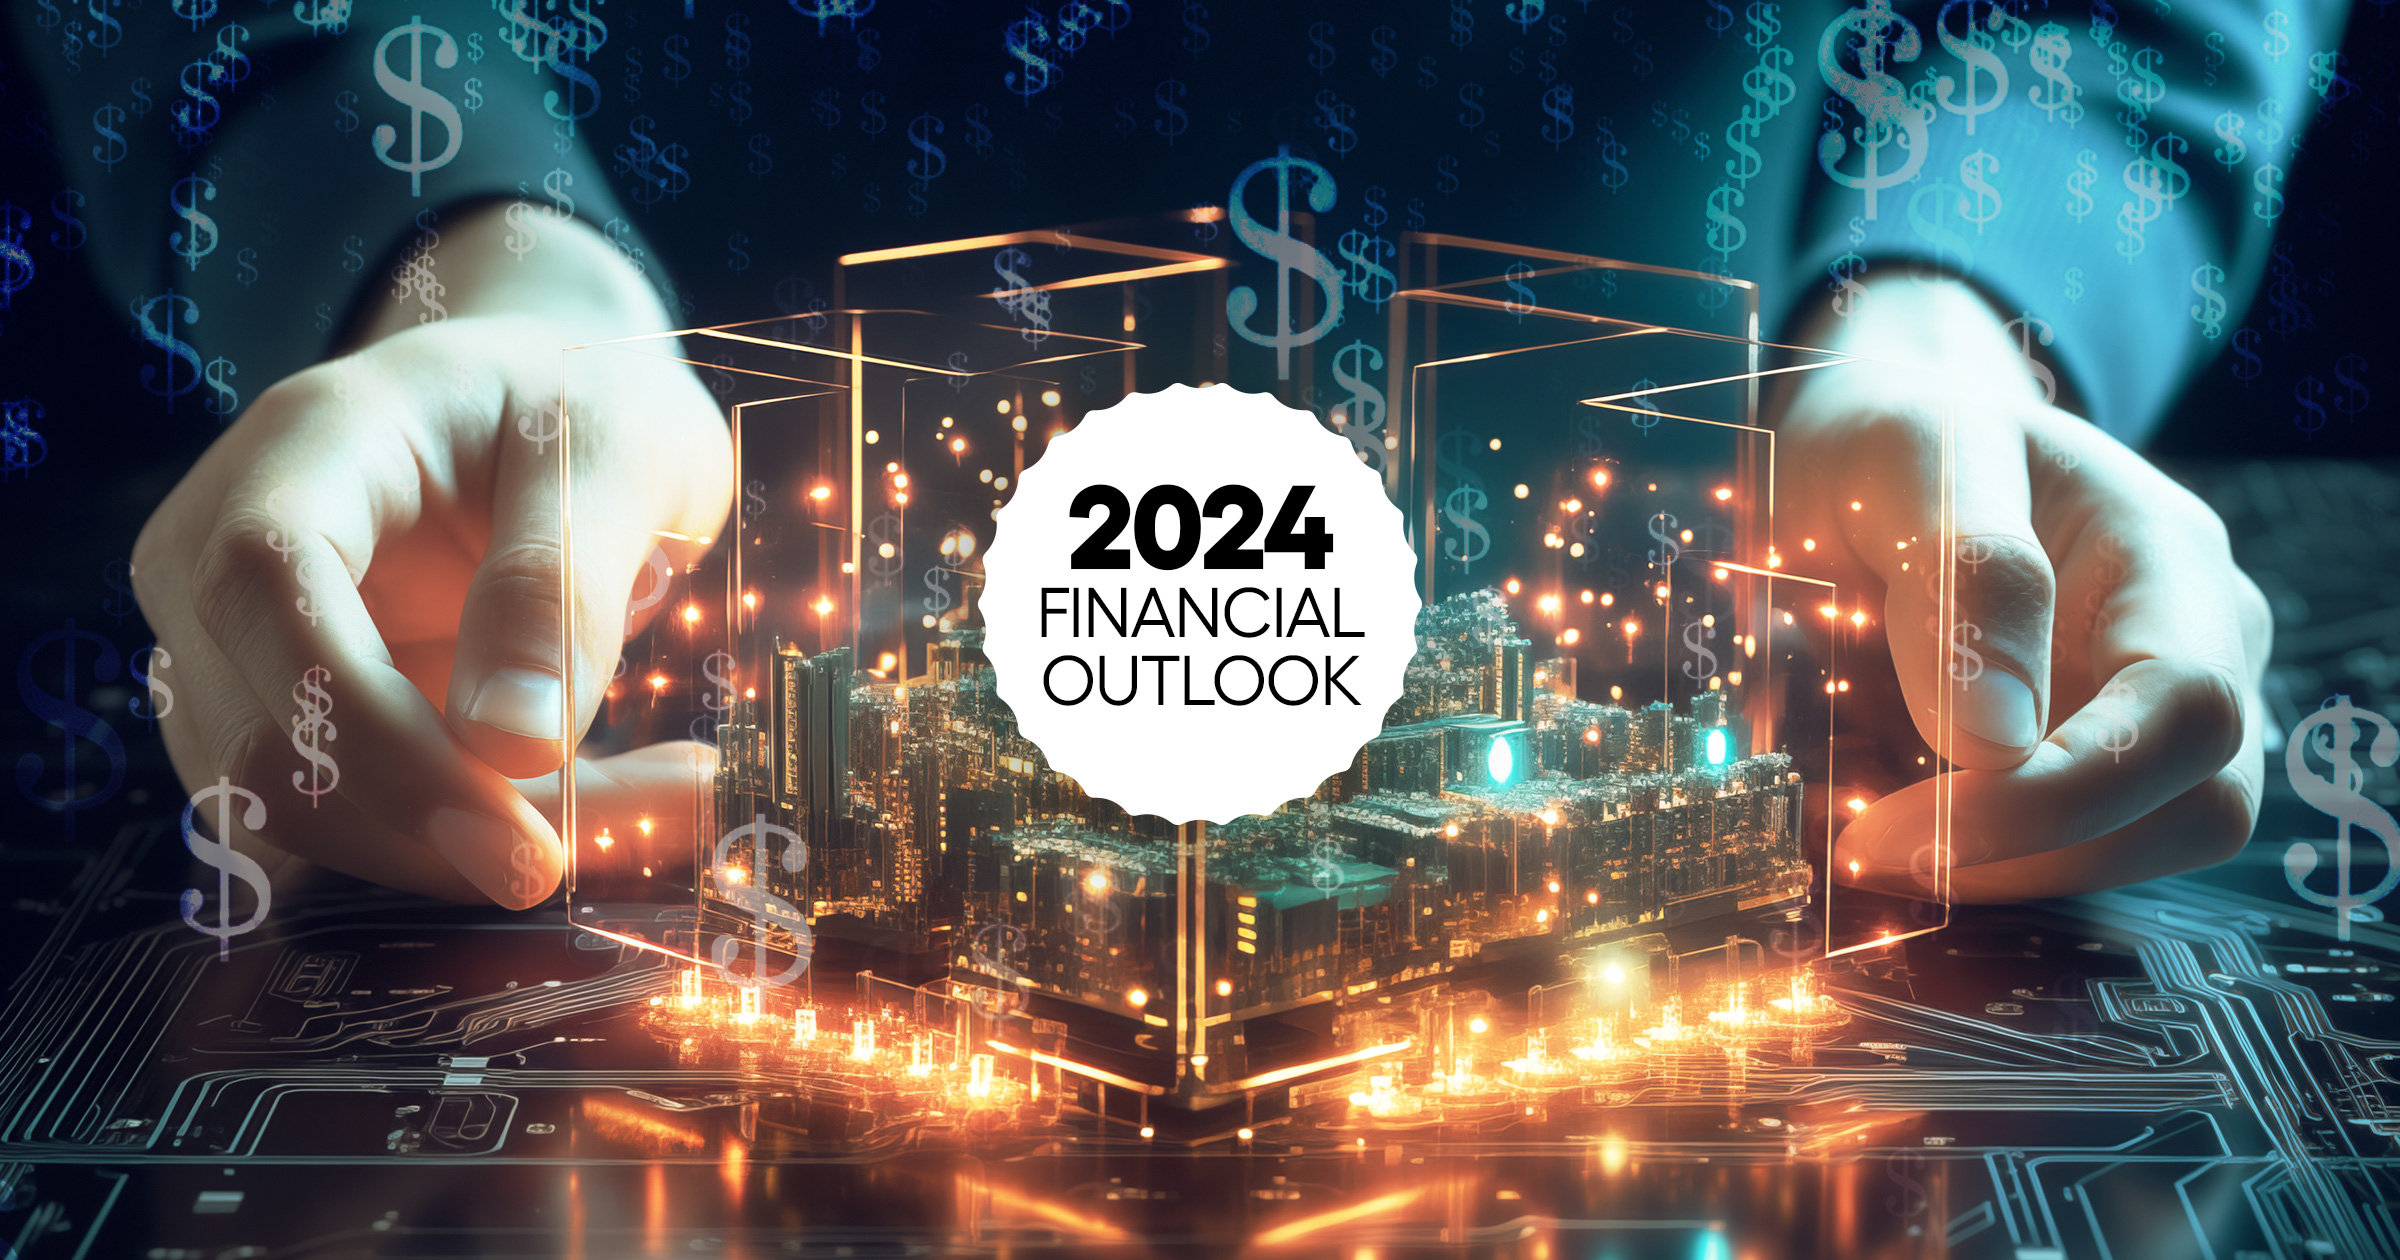 Financial Services Firms Look At Whats In Store For The Markets And The Economy In 2024 